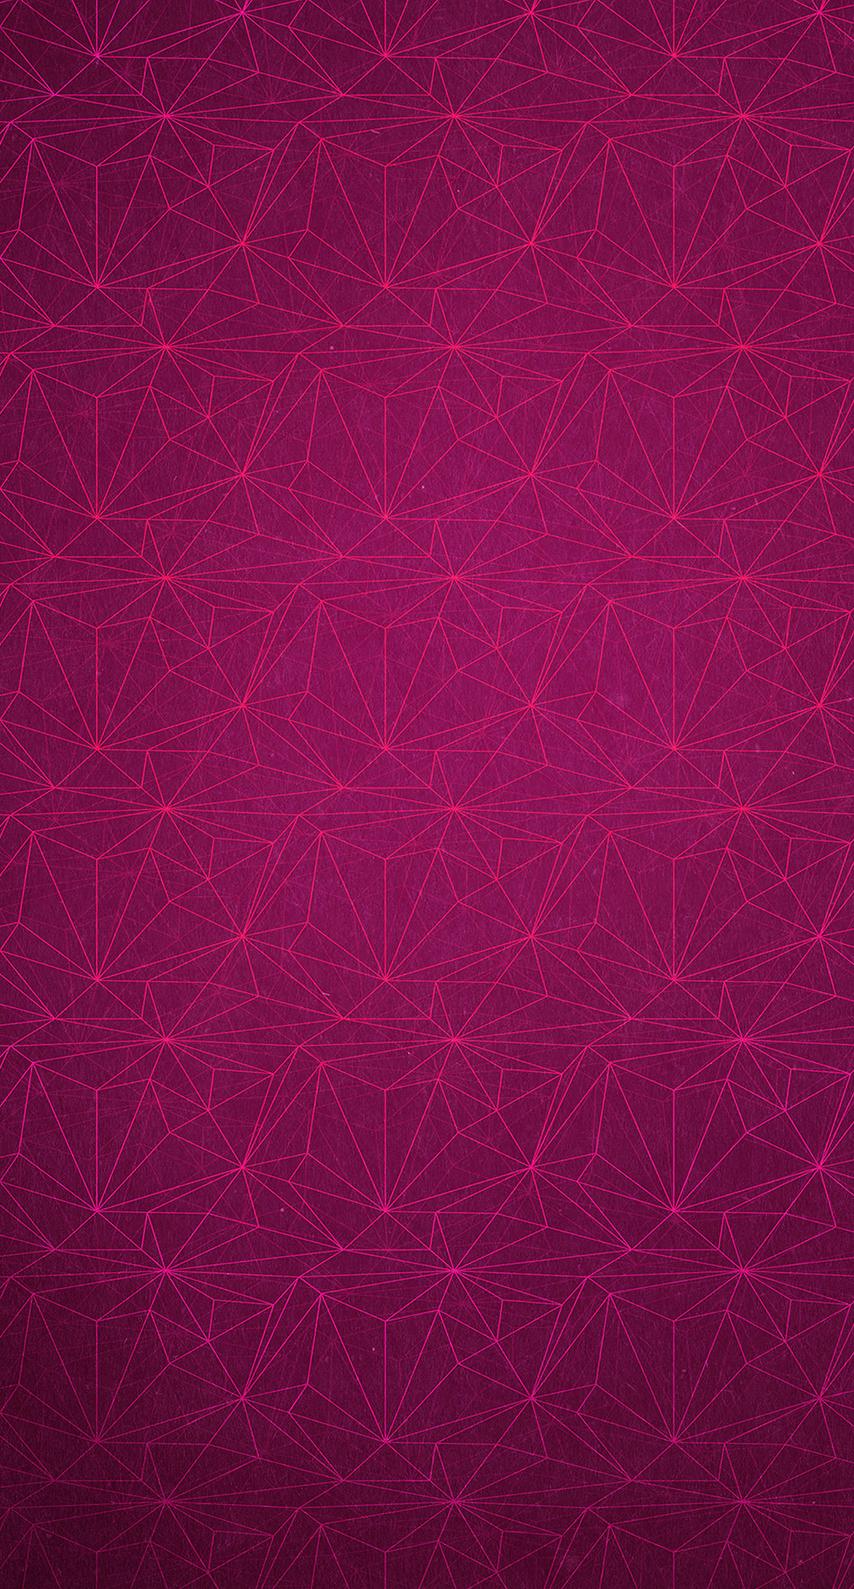 Try Awesome Wallpaper For iPhone 6s 5s